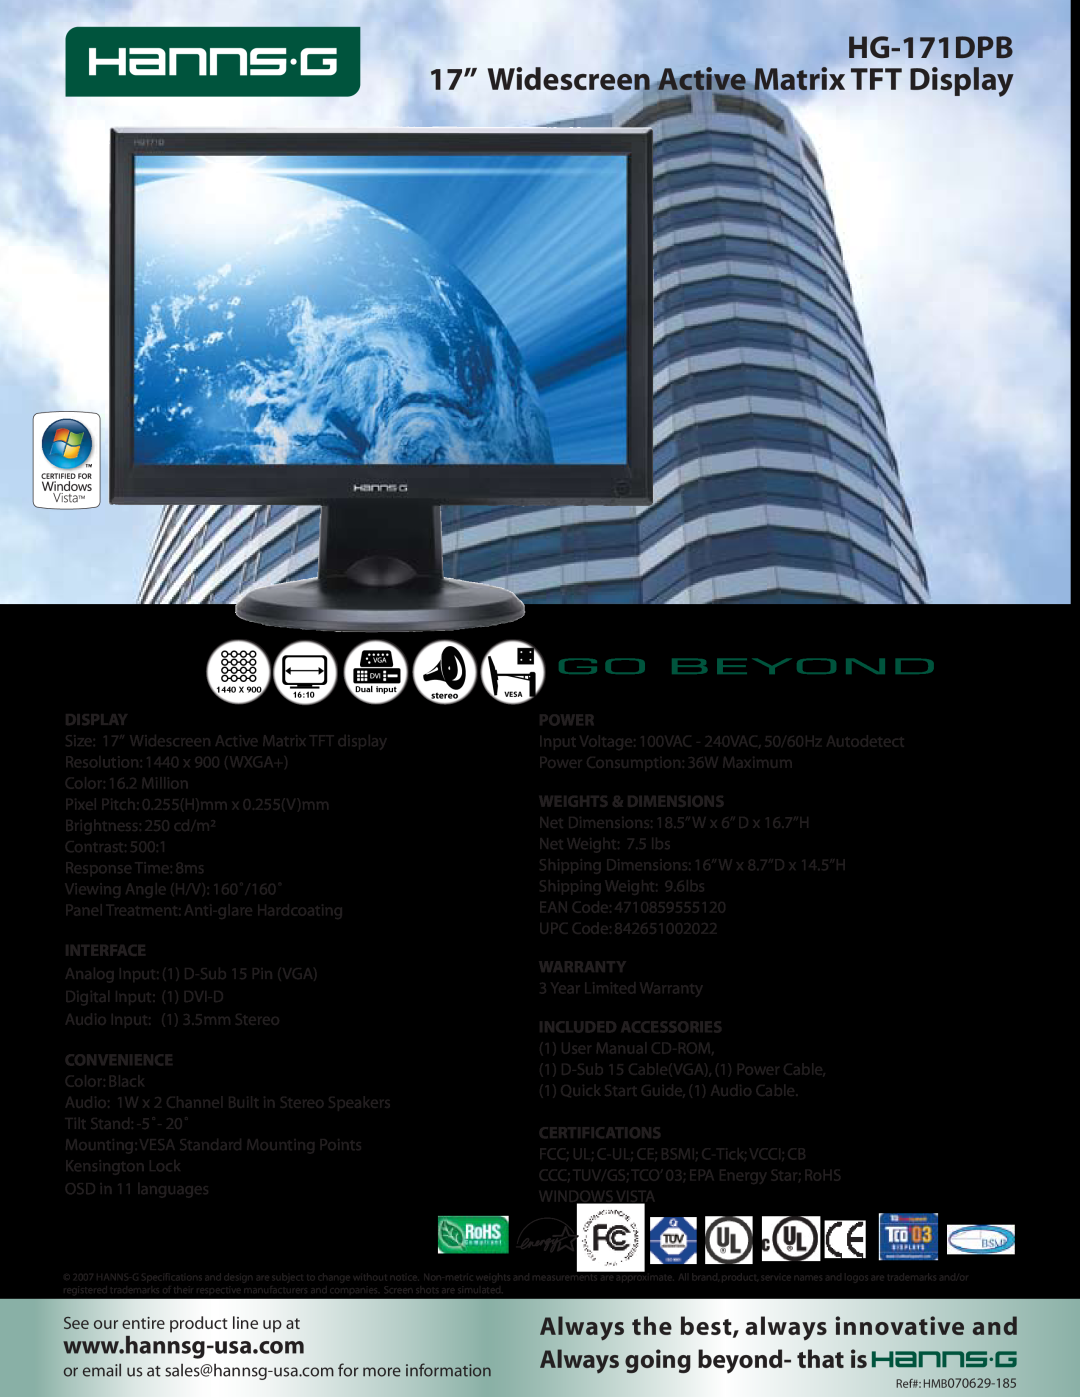 Hanns.G dimensions HG-171DPB 17” Widescreen Active Matrix TFT Display, Power, Weights & Dimensions, Interface, Warranty 